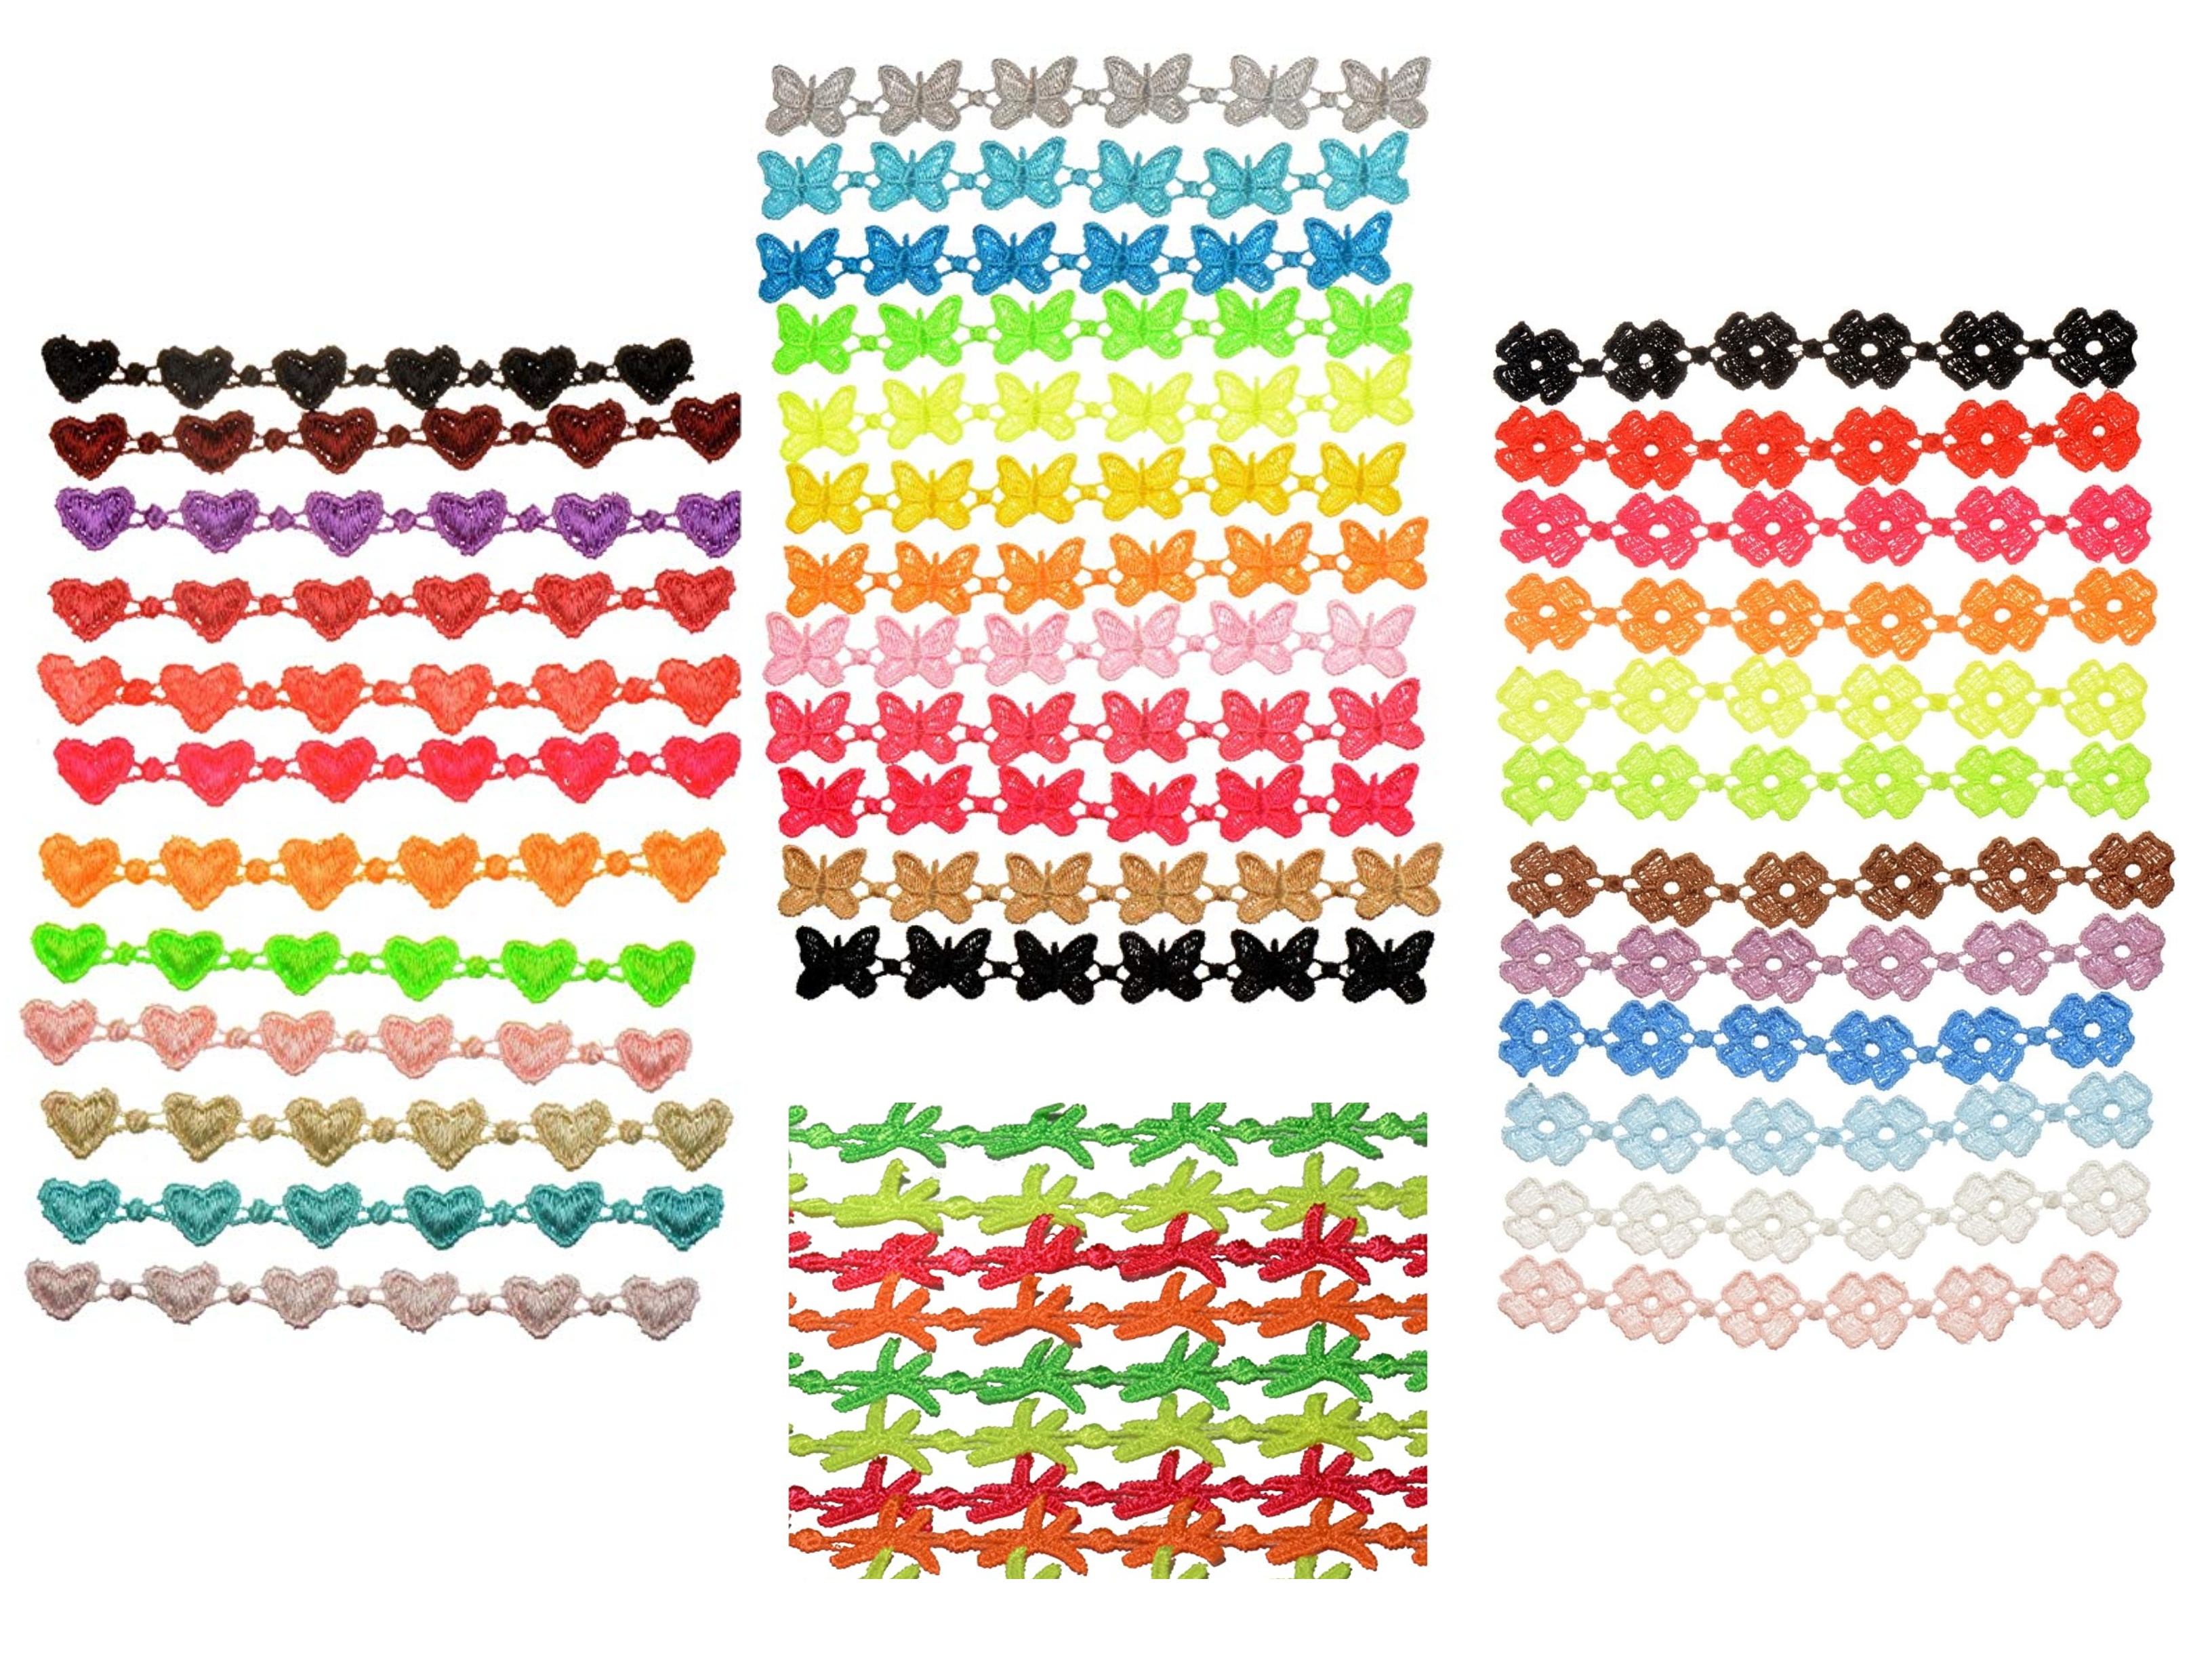 Wholesale Lot of 100 Embroidered Lace Bracelets/Anklets Butterflies, Starfish, Hearts & Flowers